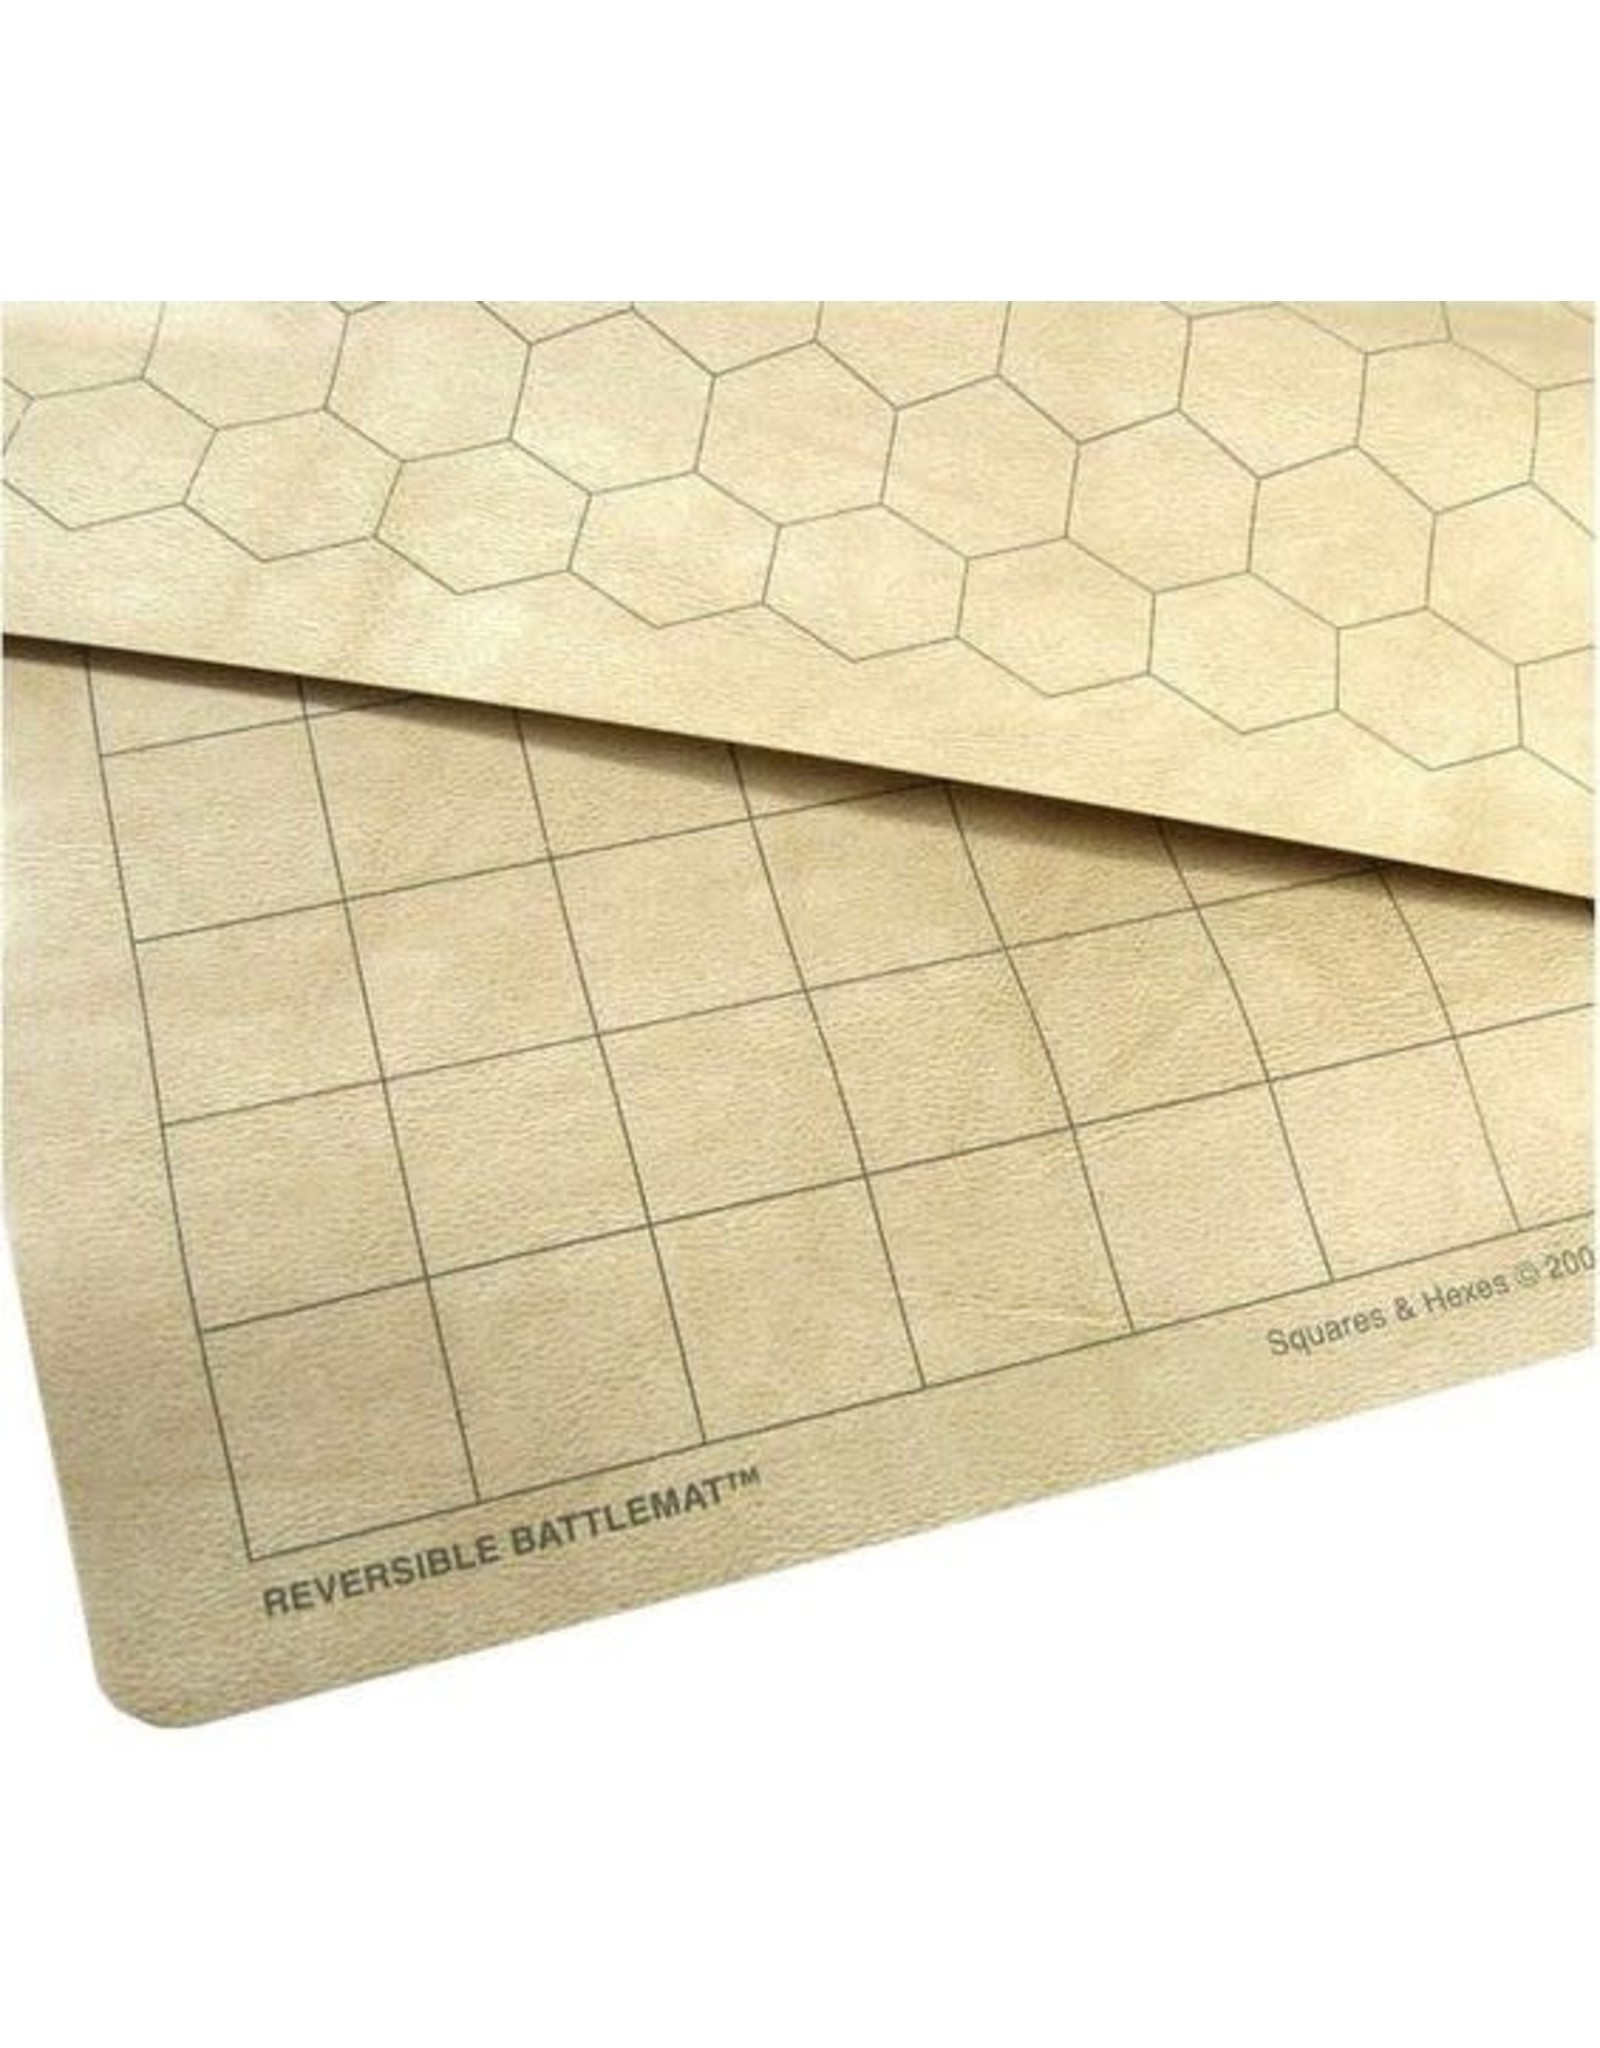 chessex Battlemat - Reversible: 1 inch squares and hexes